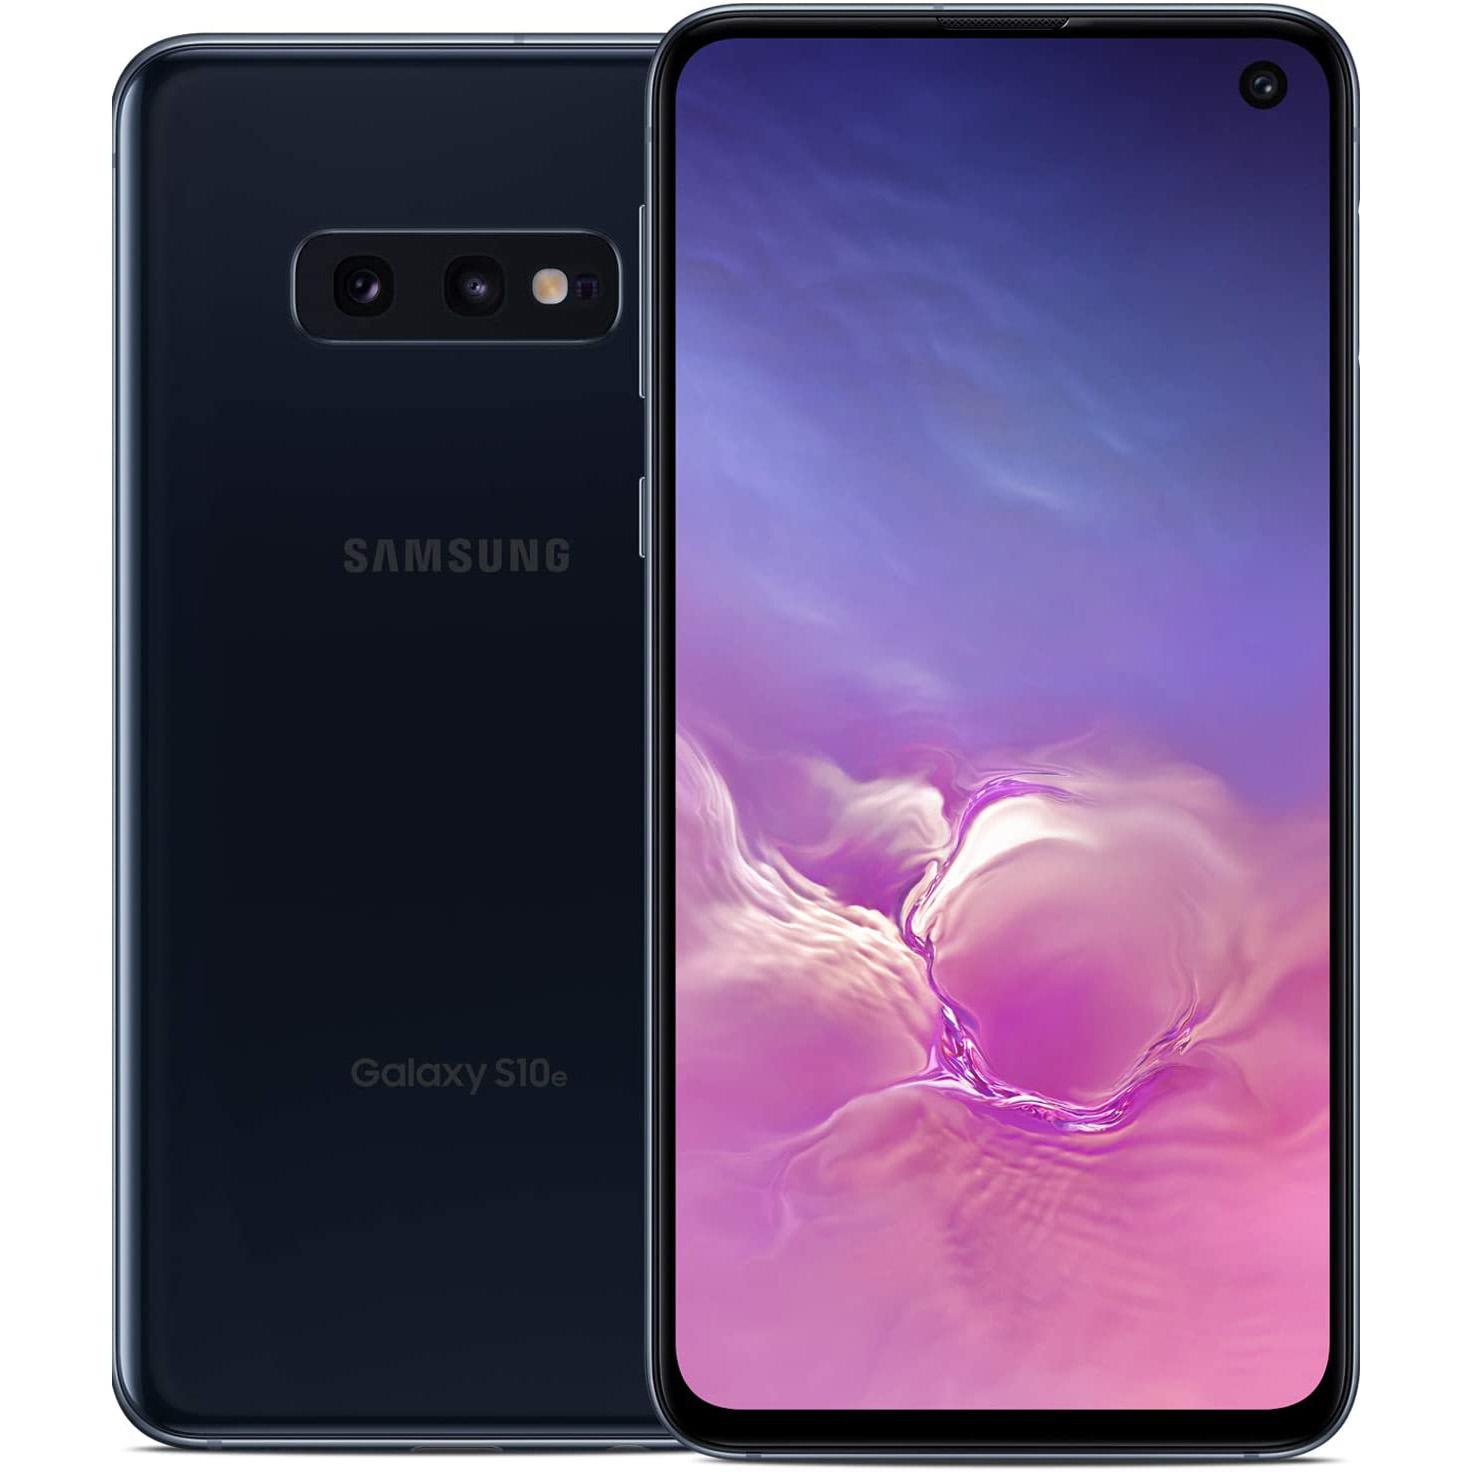 Samsung Galaxy S10e 256GB Unlocked Android Smartphone for $499 Shipped